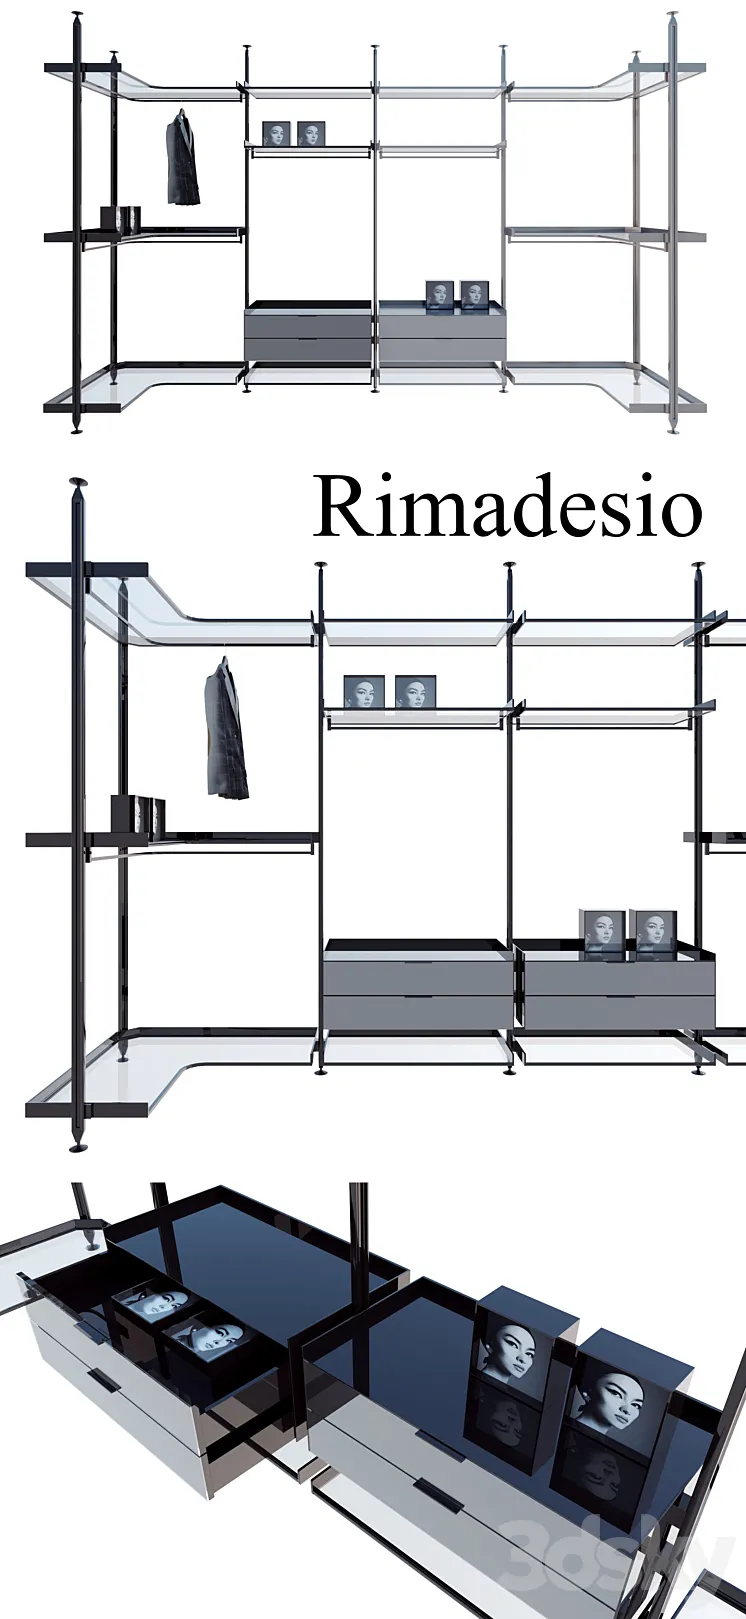 Rimadesio zenit system 02 living-rooms and walk-in closets Kitchen Wardrobe Display cabinets and storage 3DS Max